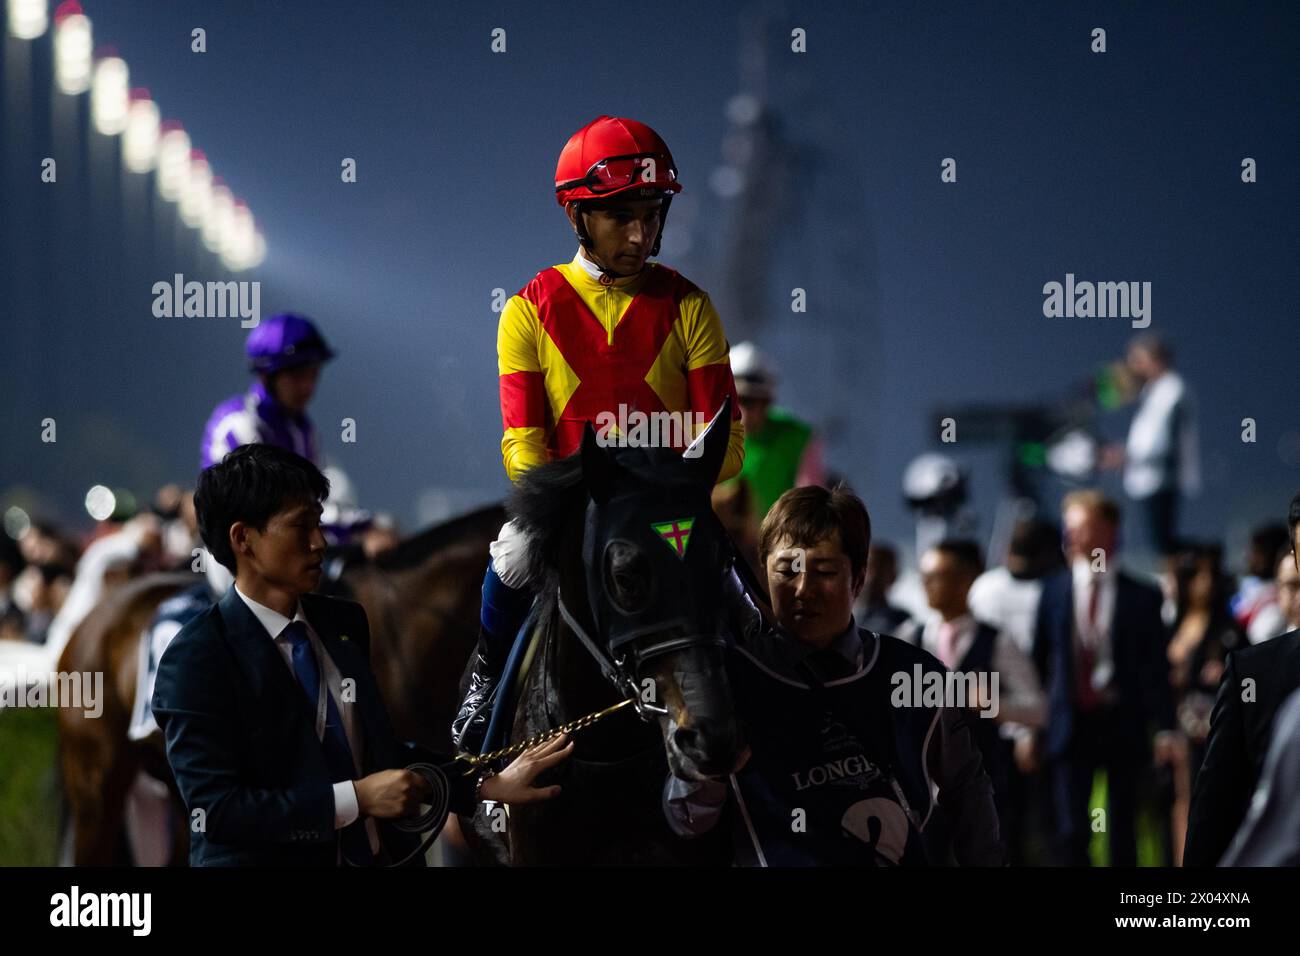 Justin Palace and Joao Moreira head to the start for the Group 1 Longines Dubai Sheema Classic, Meydan, 30/03/24. Credit JTW Equine Images / Alamy. Stock Photo